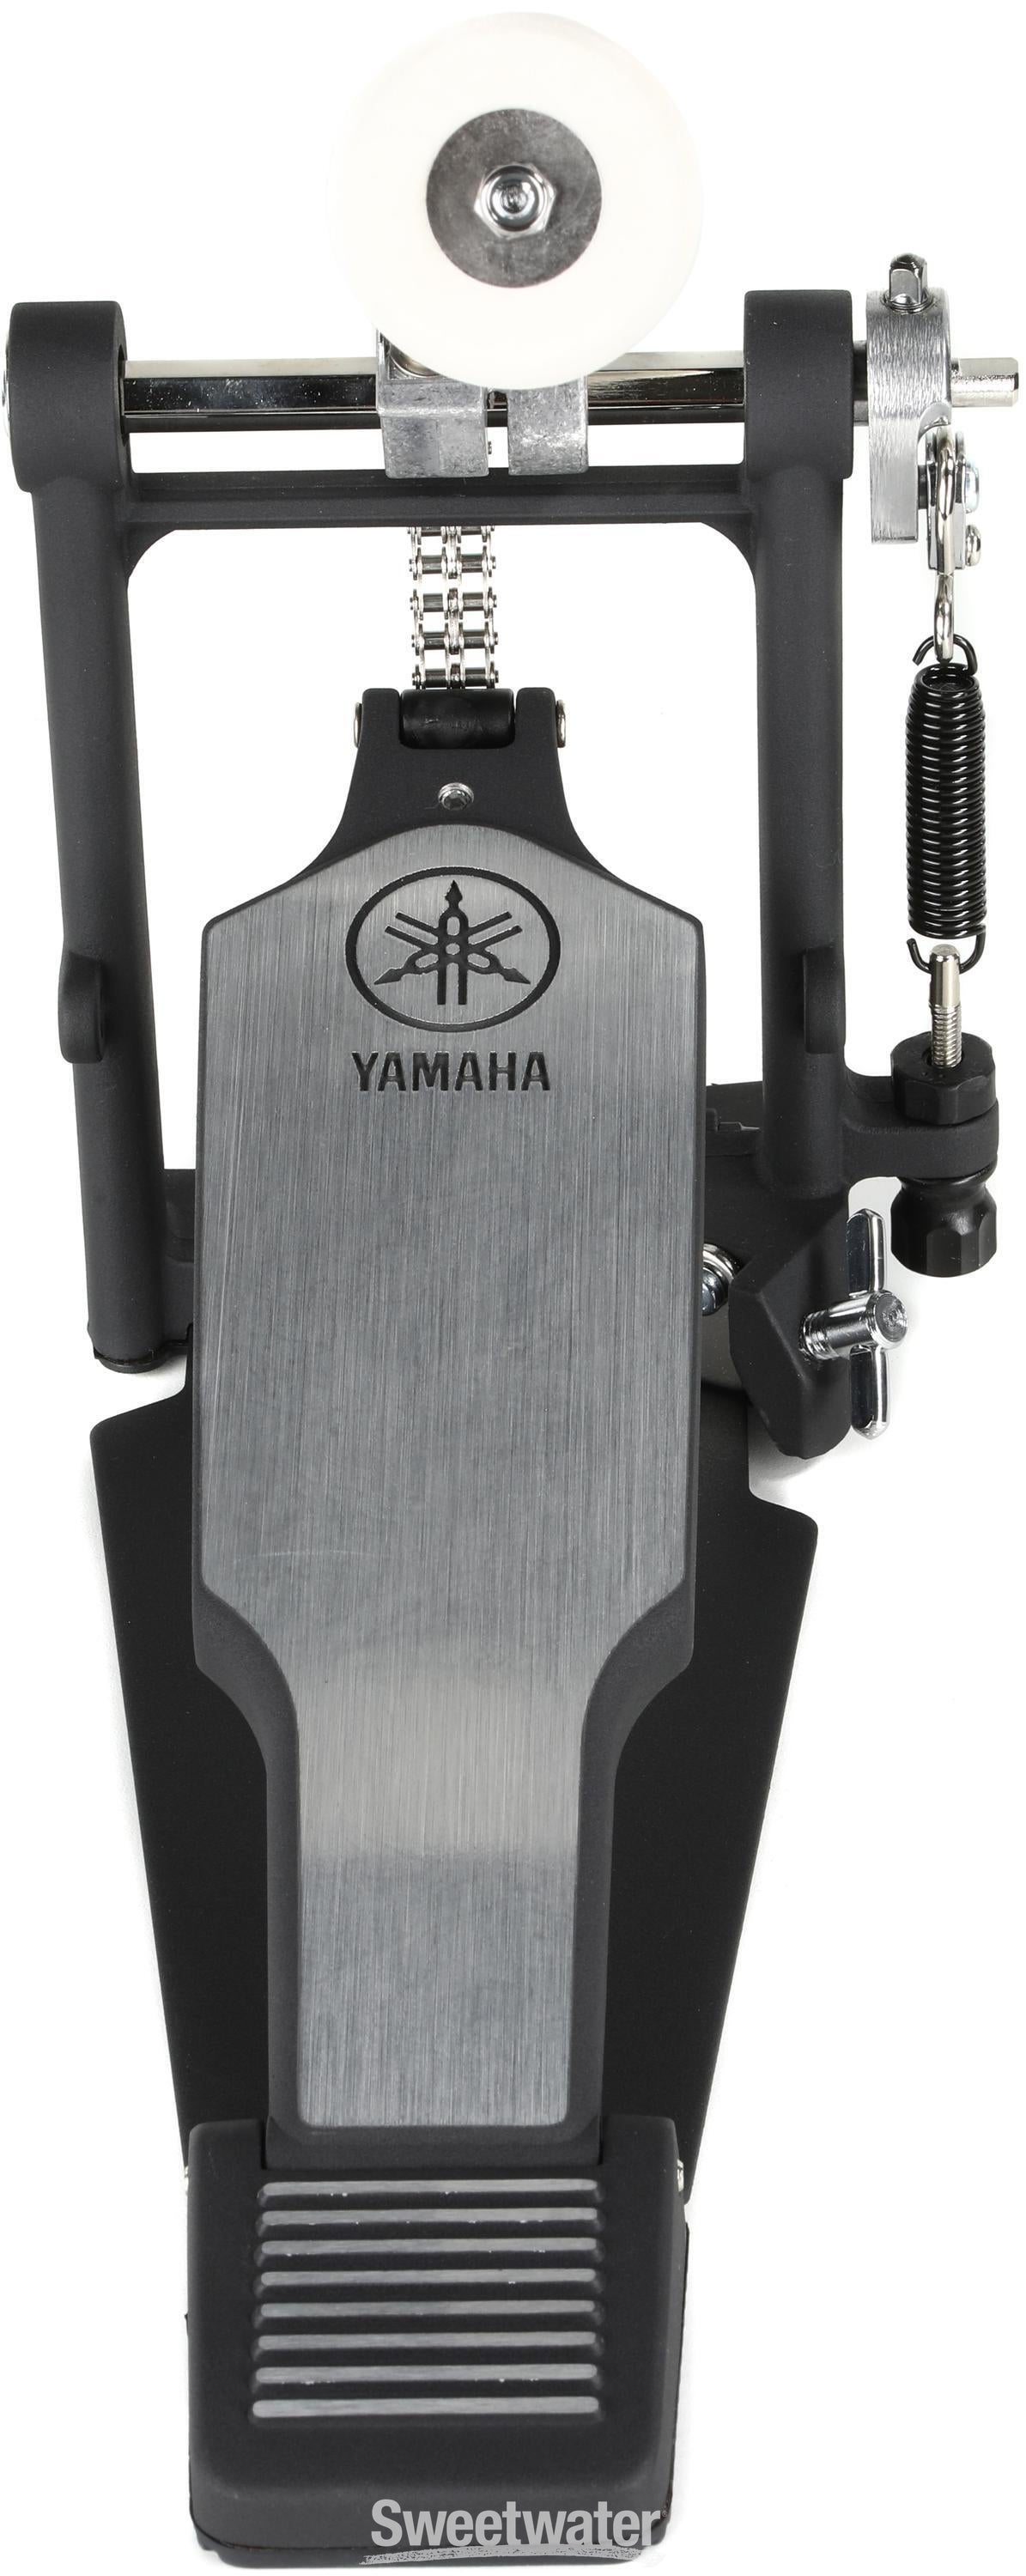 Yamaha FP-8500C Double Chain Drive Single Bass Drum Pedal with